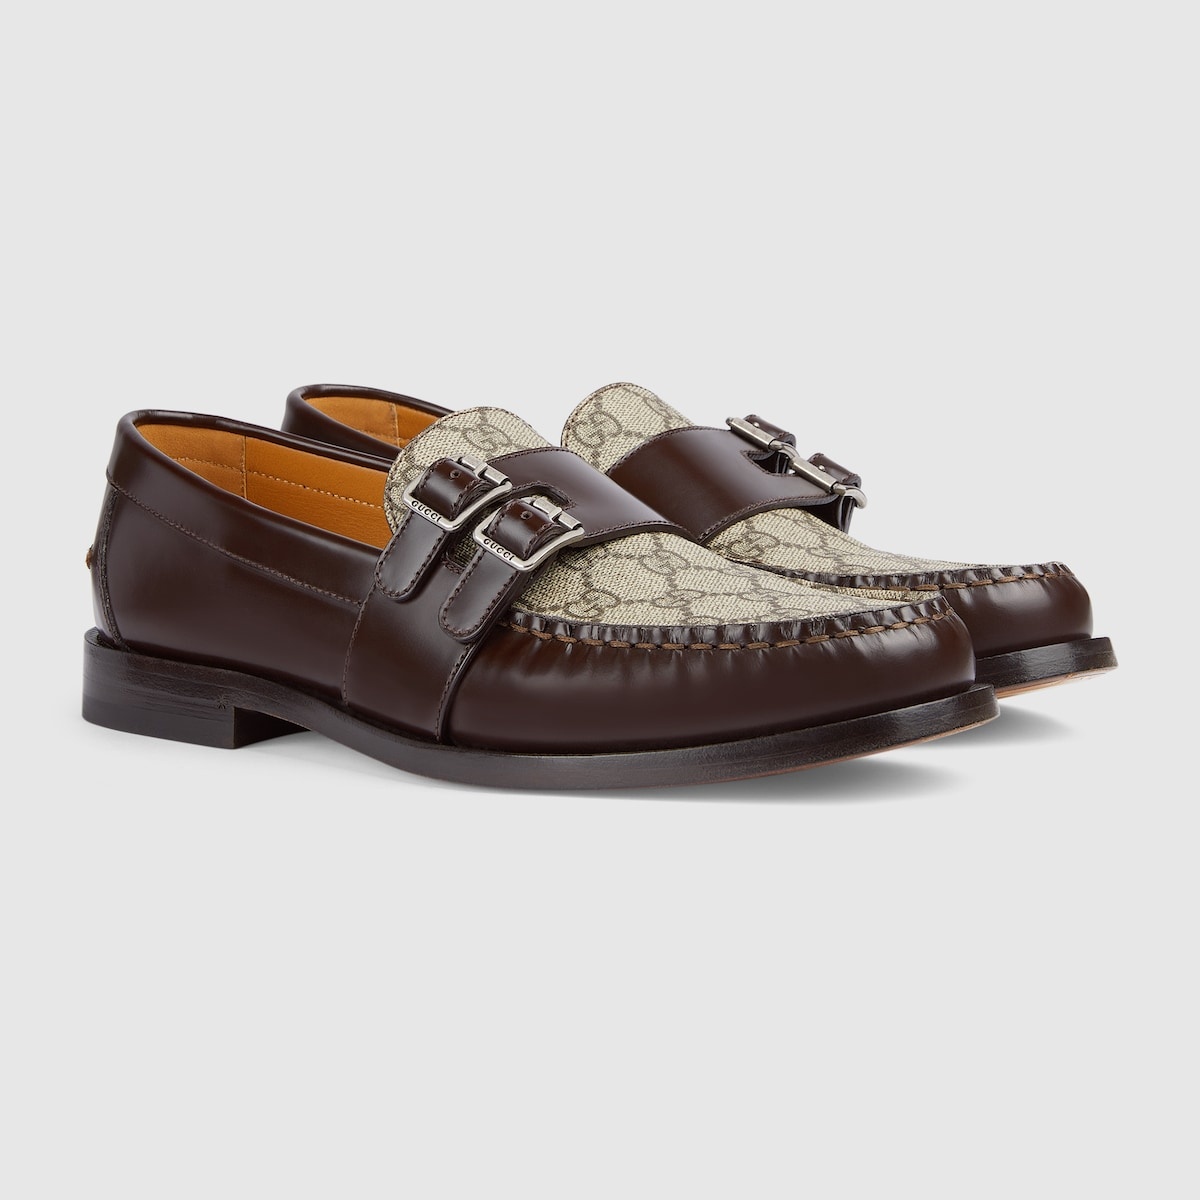 Men's buckle loafer with GG - 2